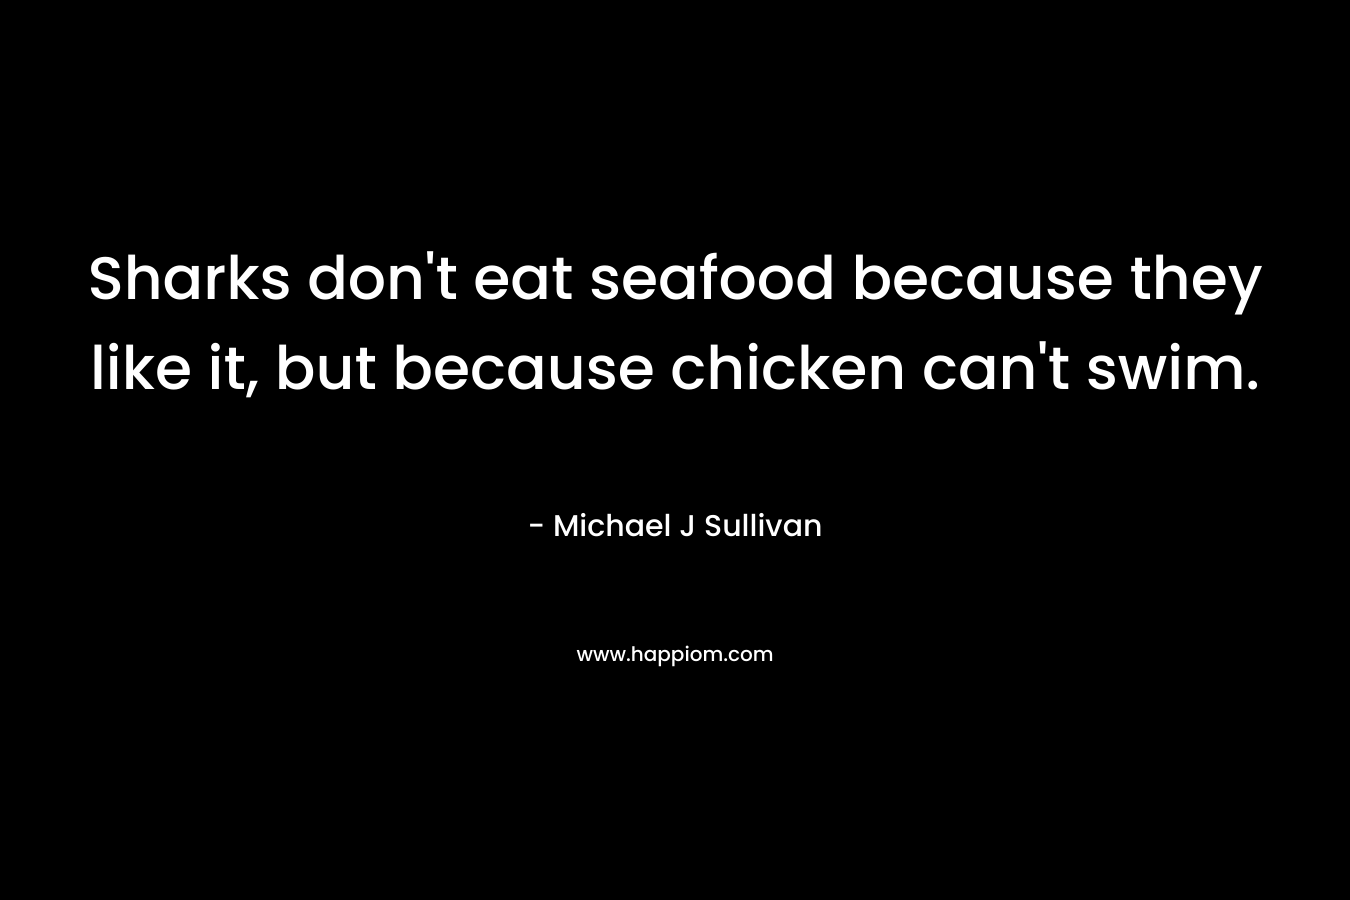 Sharks don’t eat seafood because they like it, but because chicken can’t swim. – Michael J Sullivan